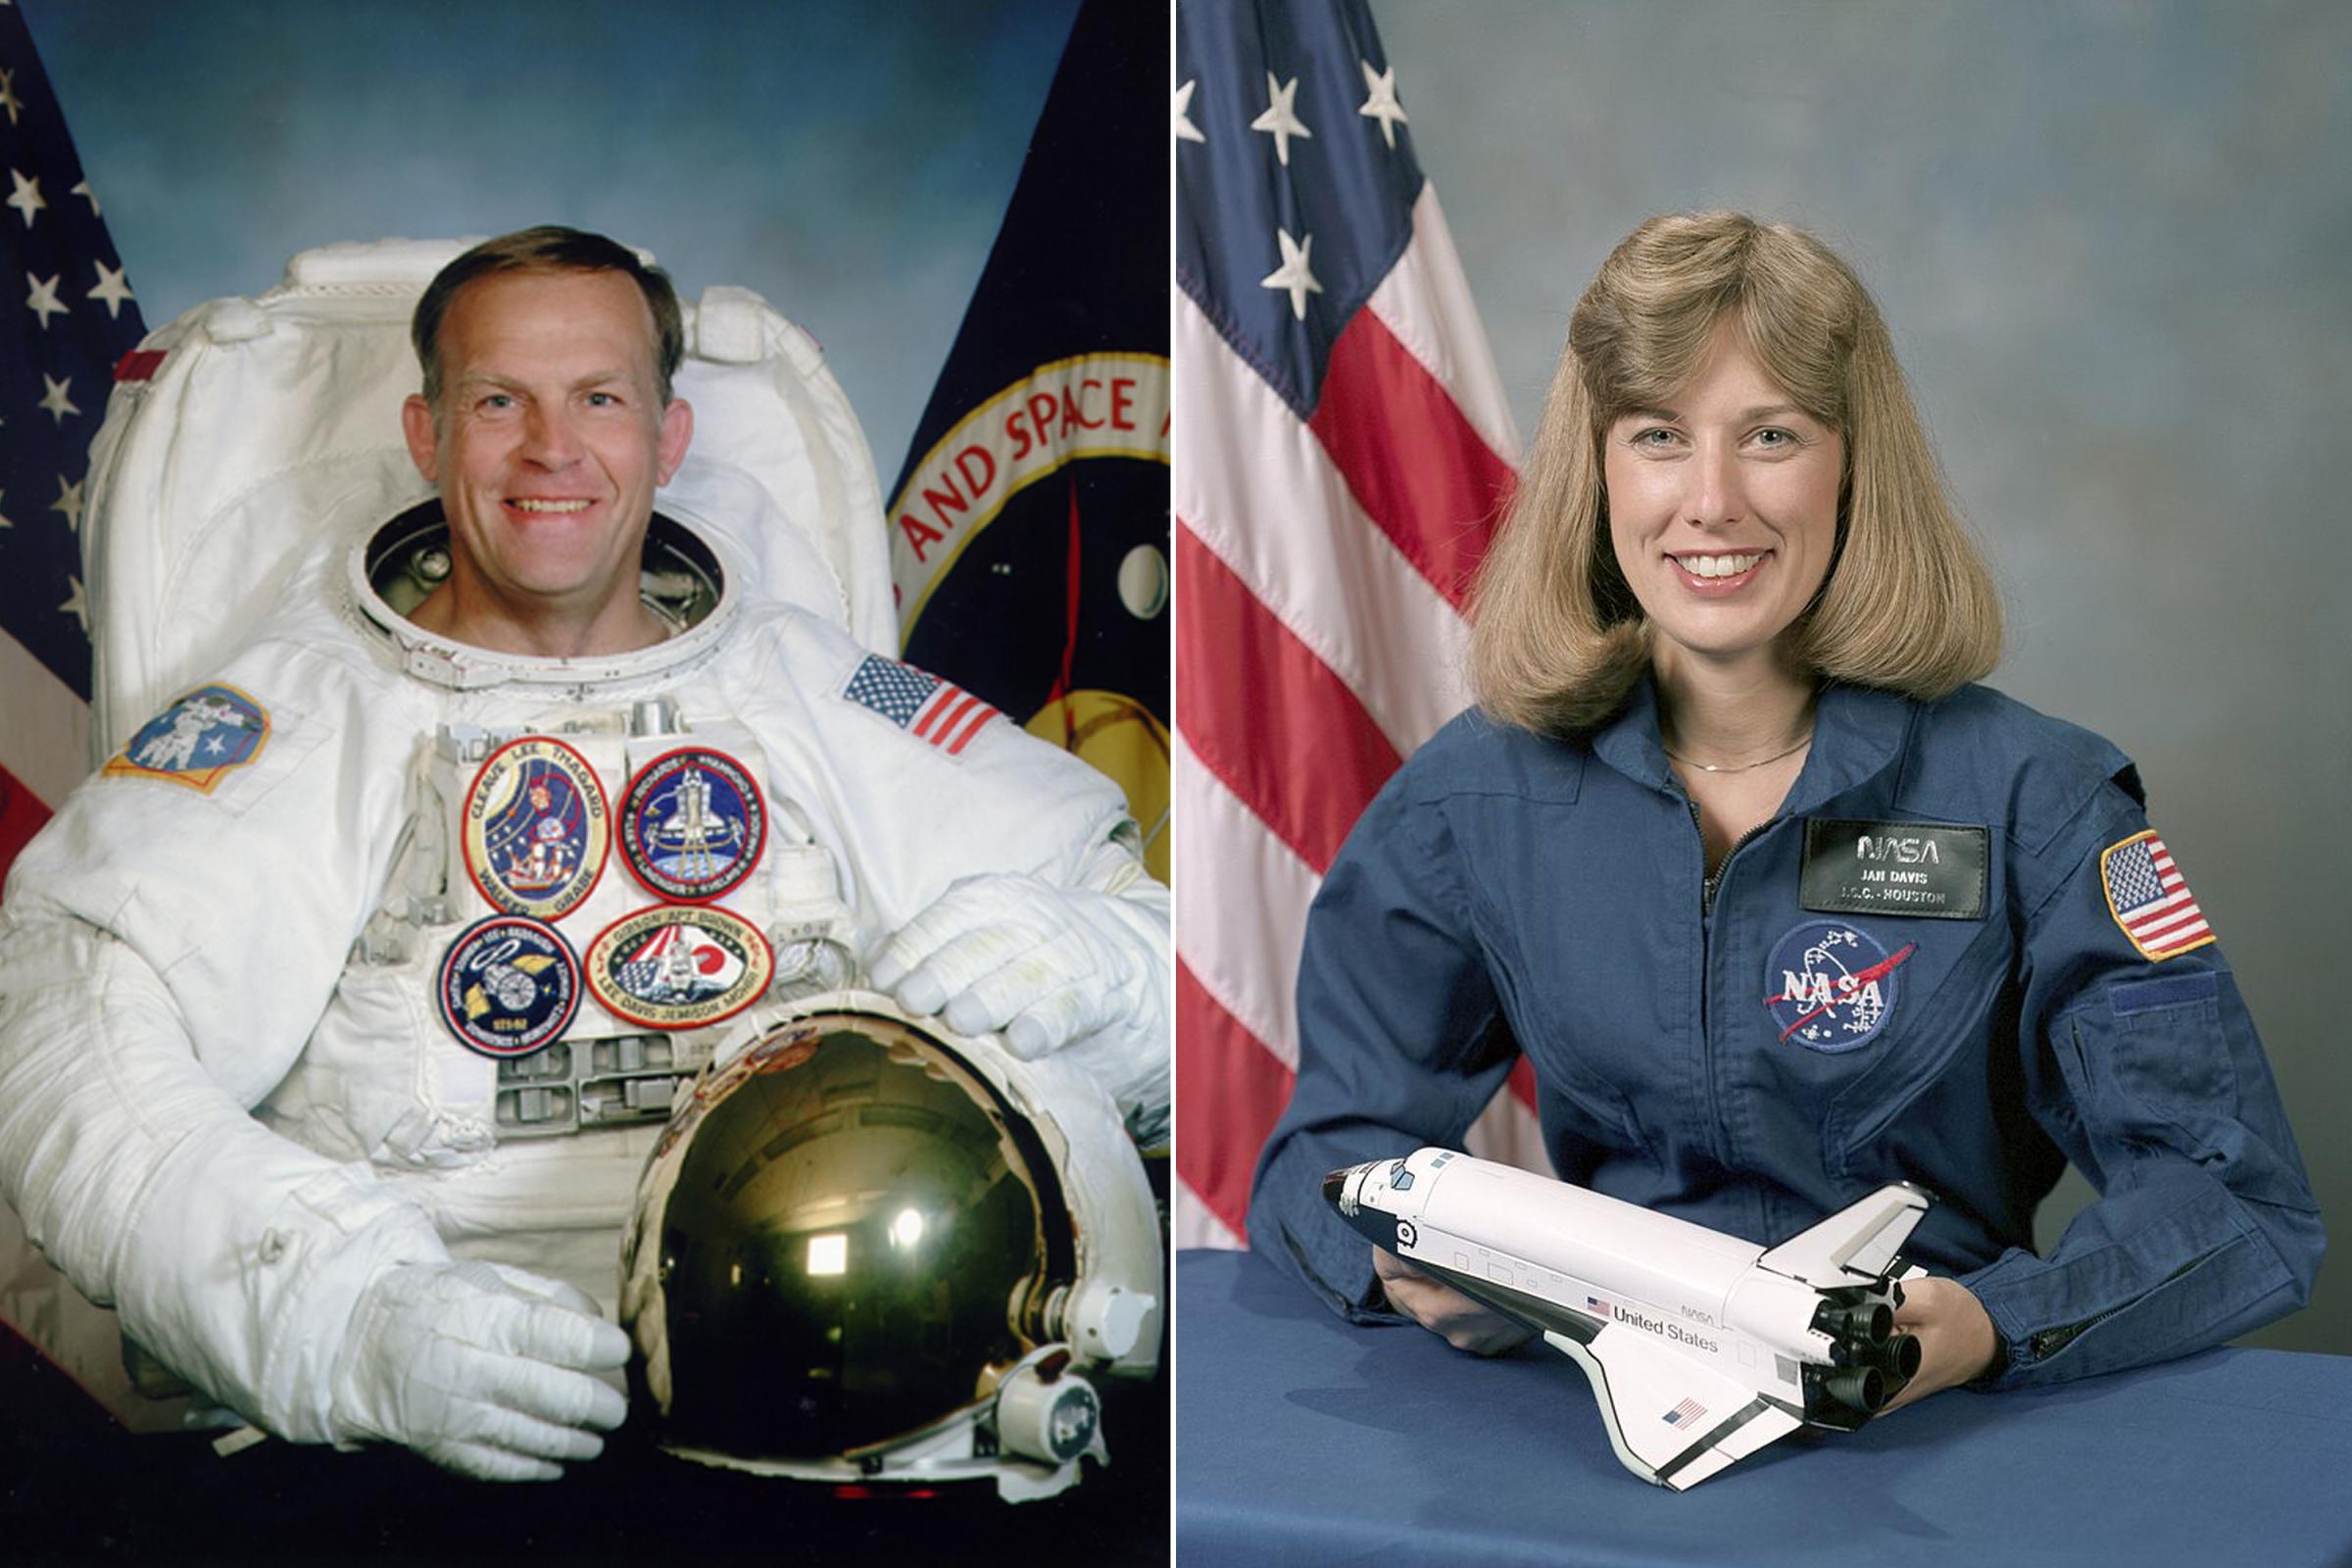 Mark Lee and Jan Davis were the first married couple in space, they flew aboard Space Shuttle Endeavour (STS-47) in 1992. Lee and Davis had met during training for the flight and were secretly married shortly before take off. Once they had disclosed their marriage to NASA, it was too late to train a substitute.